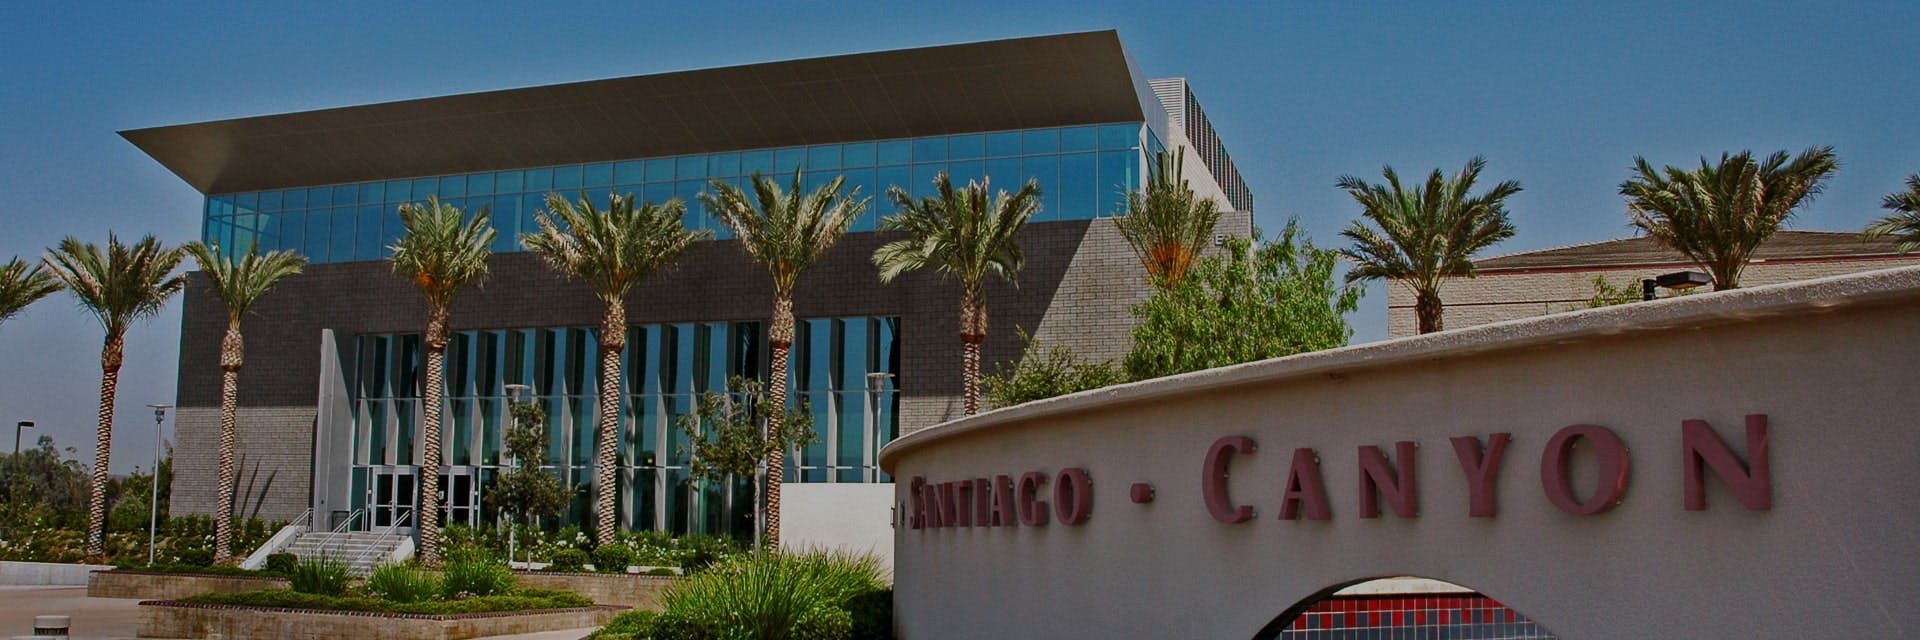 Study Abroad at Santiago Canyon College, USA - In-Depth Guide & Apply Help